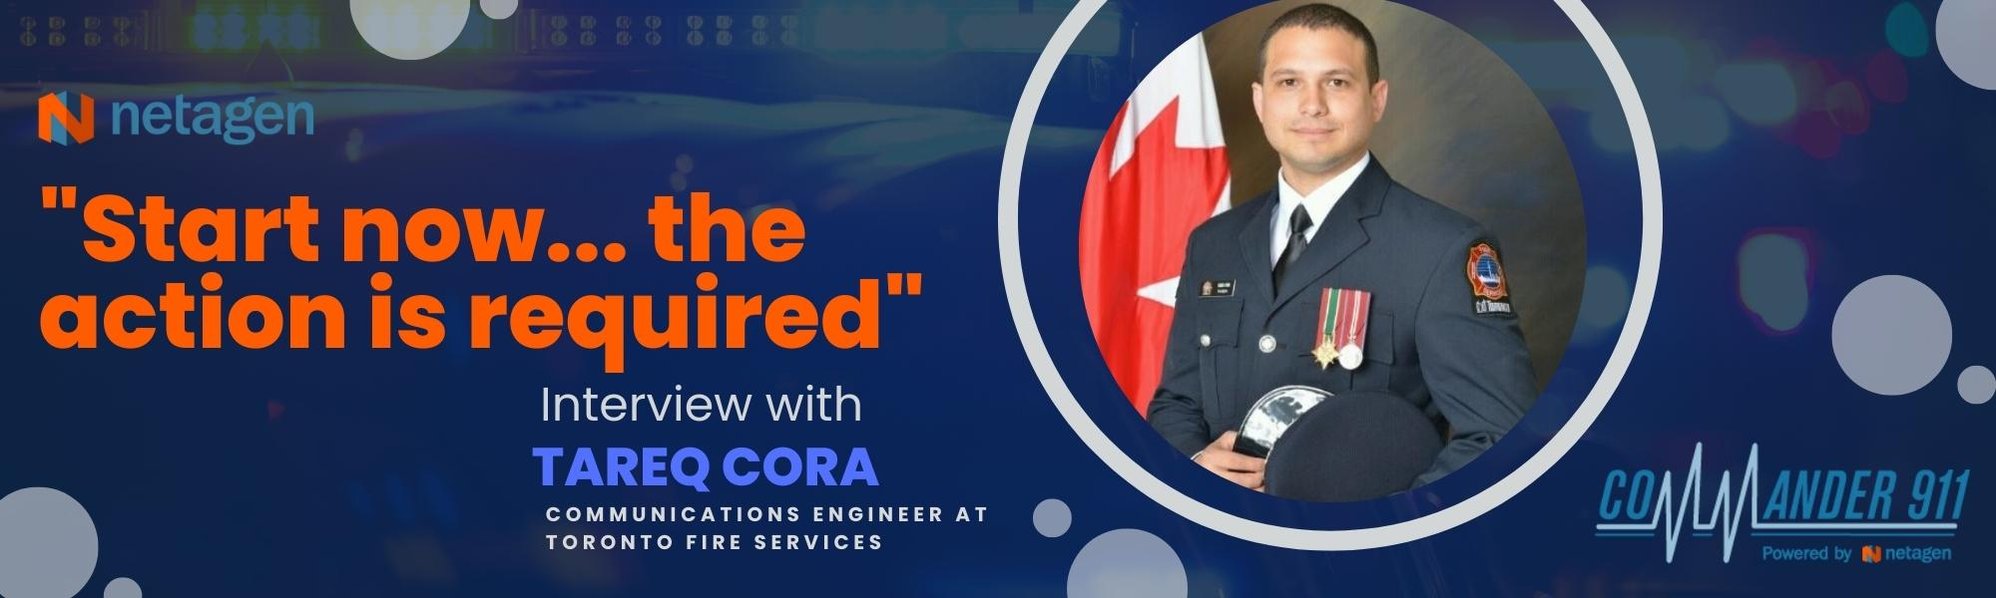 Interview with Tareq Cora - Communications Engineer at Toronto Fire Services